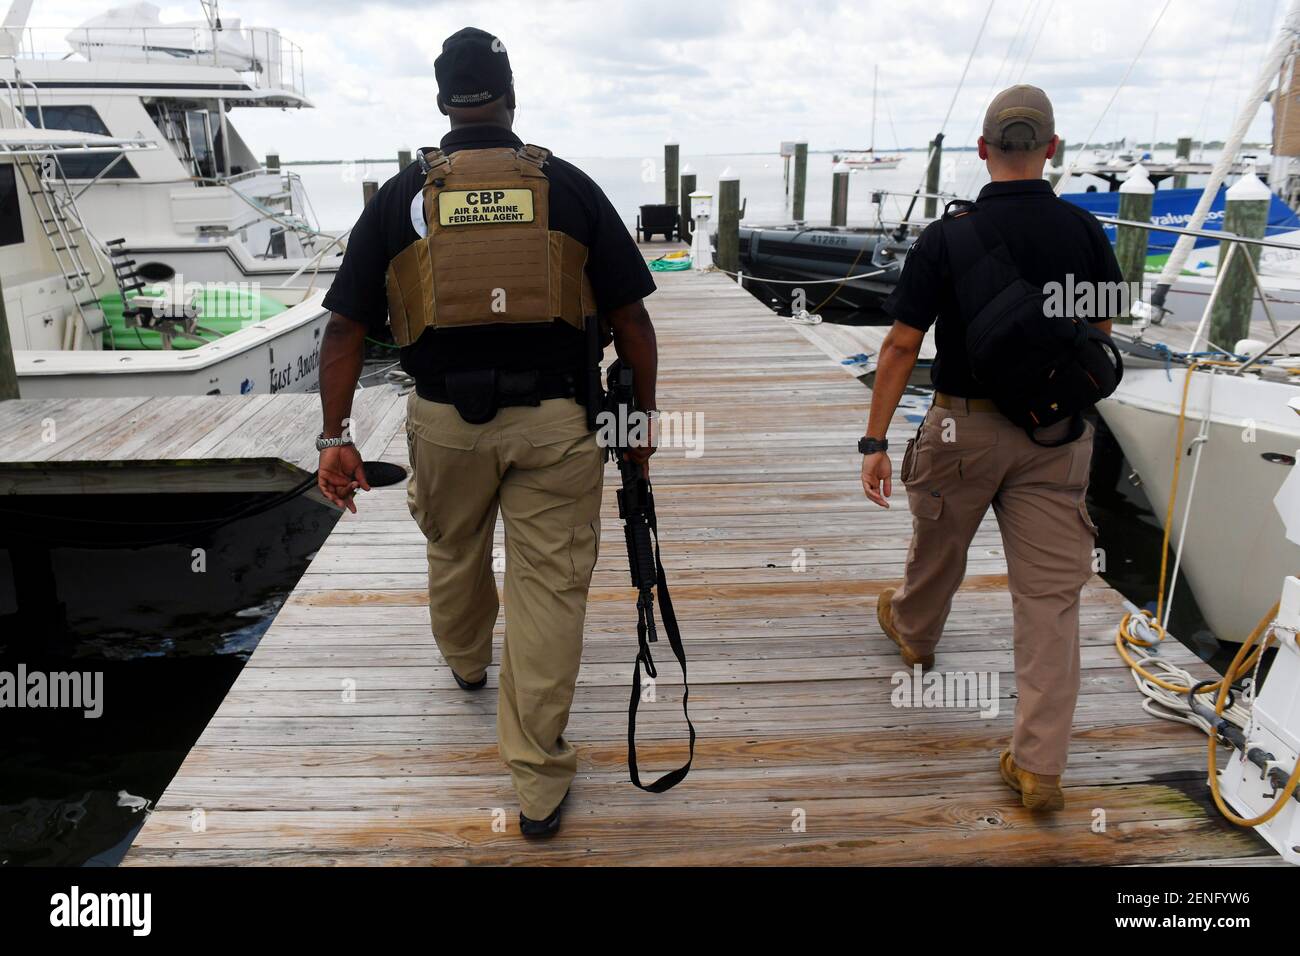 Clean Arrington (left), a marine interdiction agent with the U.S. Customs and Border Protection's Air and Marine Operations section in Fort Pierce, and Ozzy Trevino, a visual information and public affairs officer, make their way to a new 41-foot aluminum boat docked at Causeway Cove Marina on Tuesday, Aug. 6, 2019 in Fort Pierce. The new boat, one of two that will patrol the Treasure Coast, is an upgrade from the previous vessel with specialized navigational equipment and maneuverable camera gear. Tcn Customs Boat 02 Clean Arrington (left), a marine interdiction agent with the U.S. Customs an Stock Photo